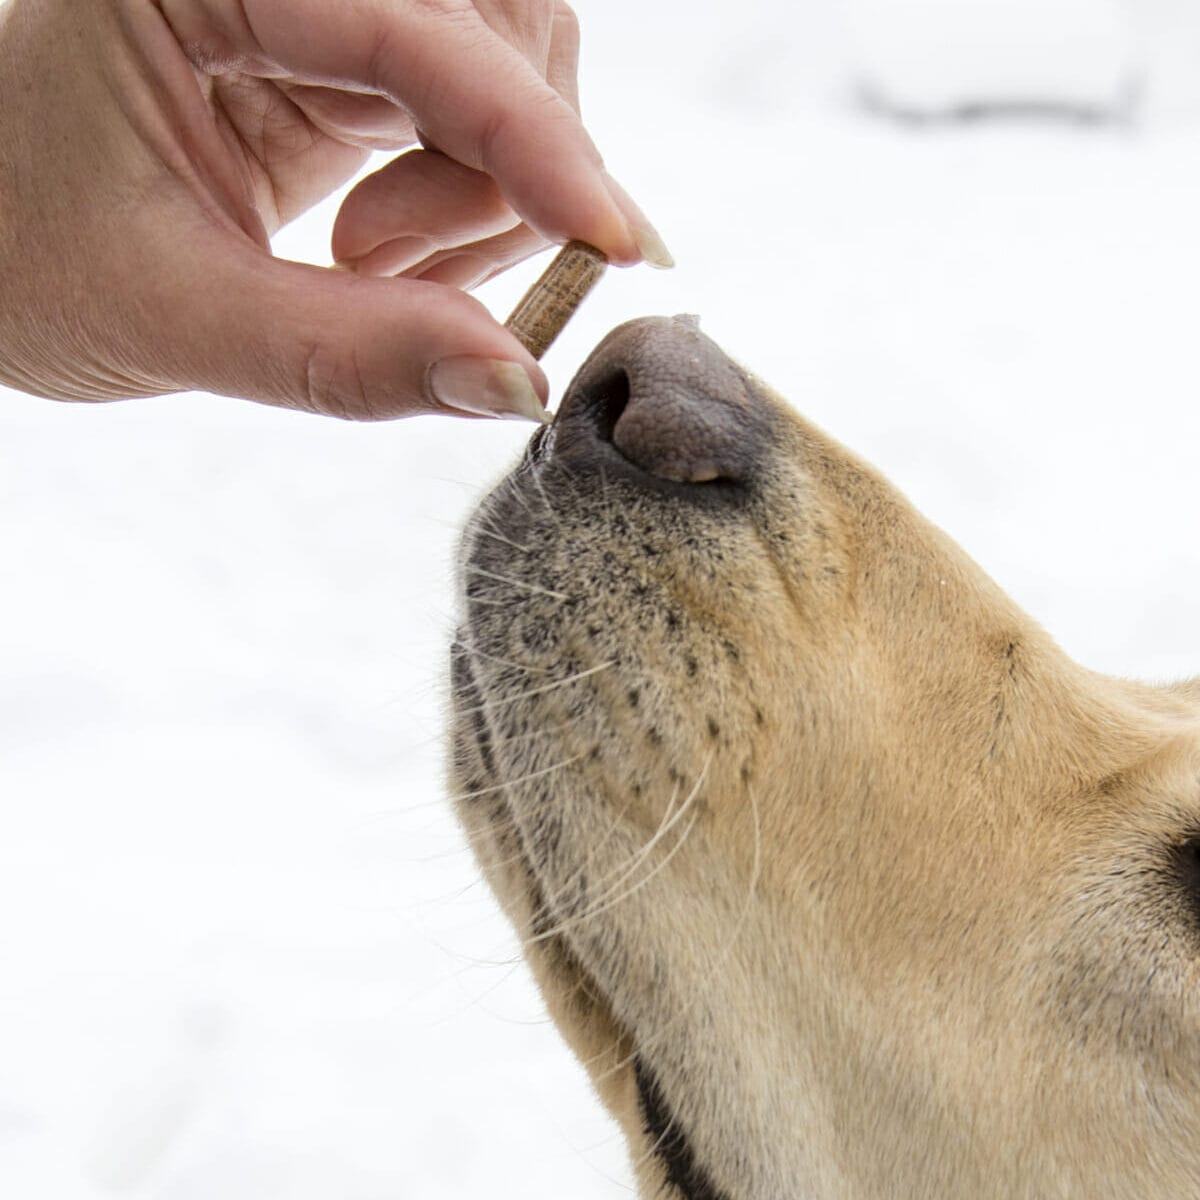 Read how to give a capsule to a dog. Hand giving yellow lab Earth Buddy Focus+Immune capsule.